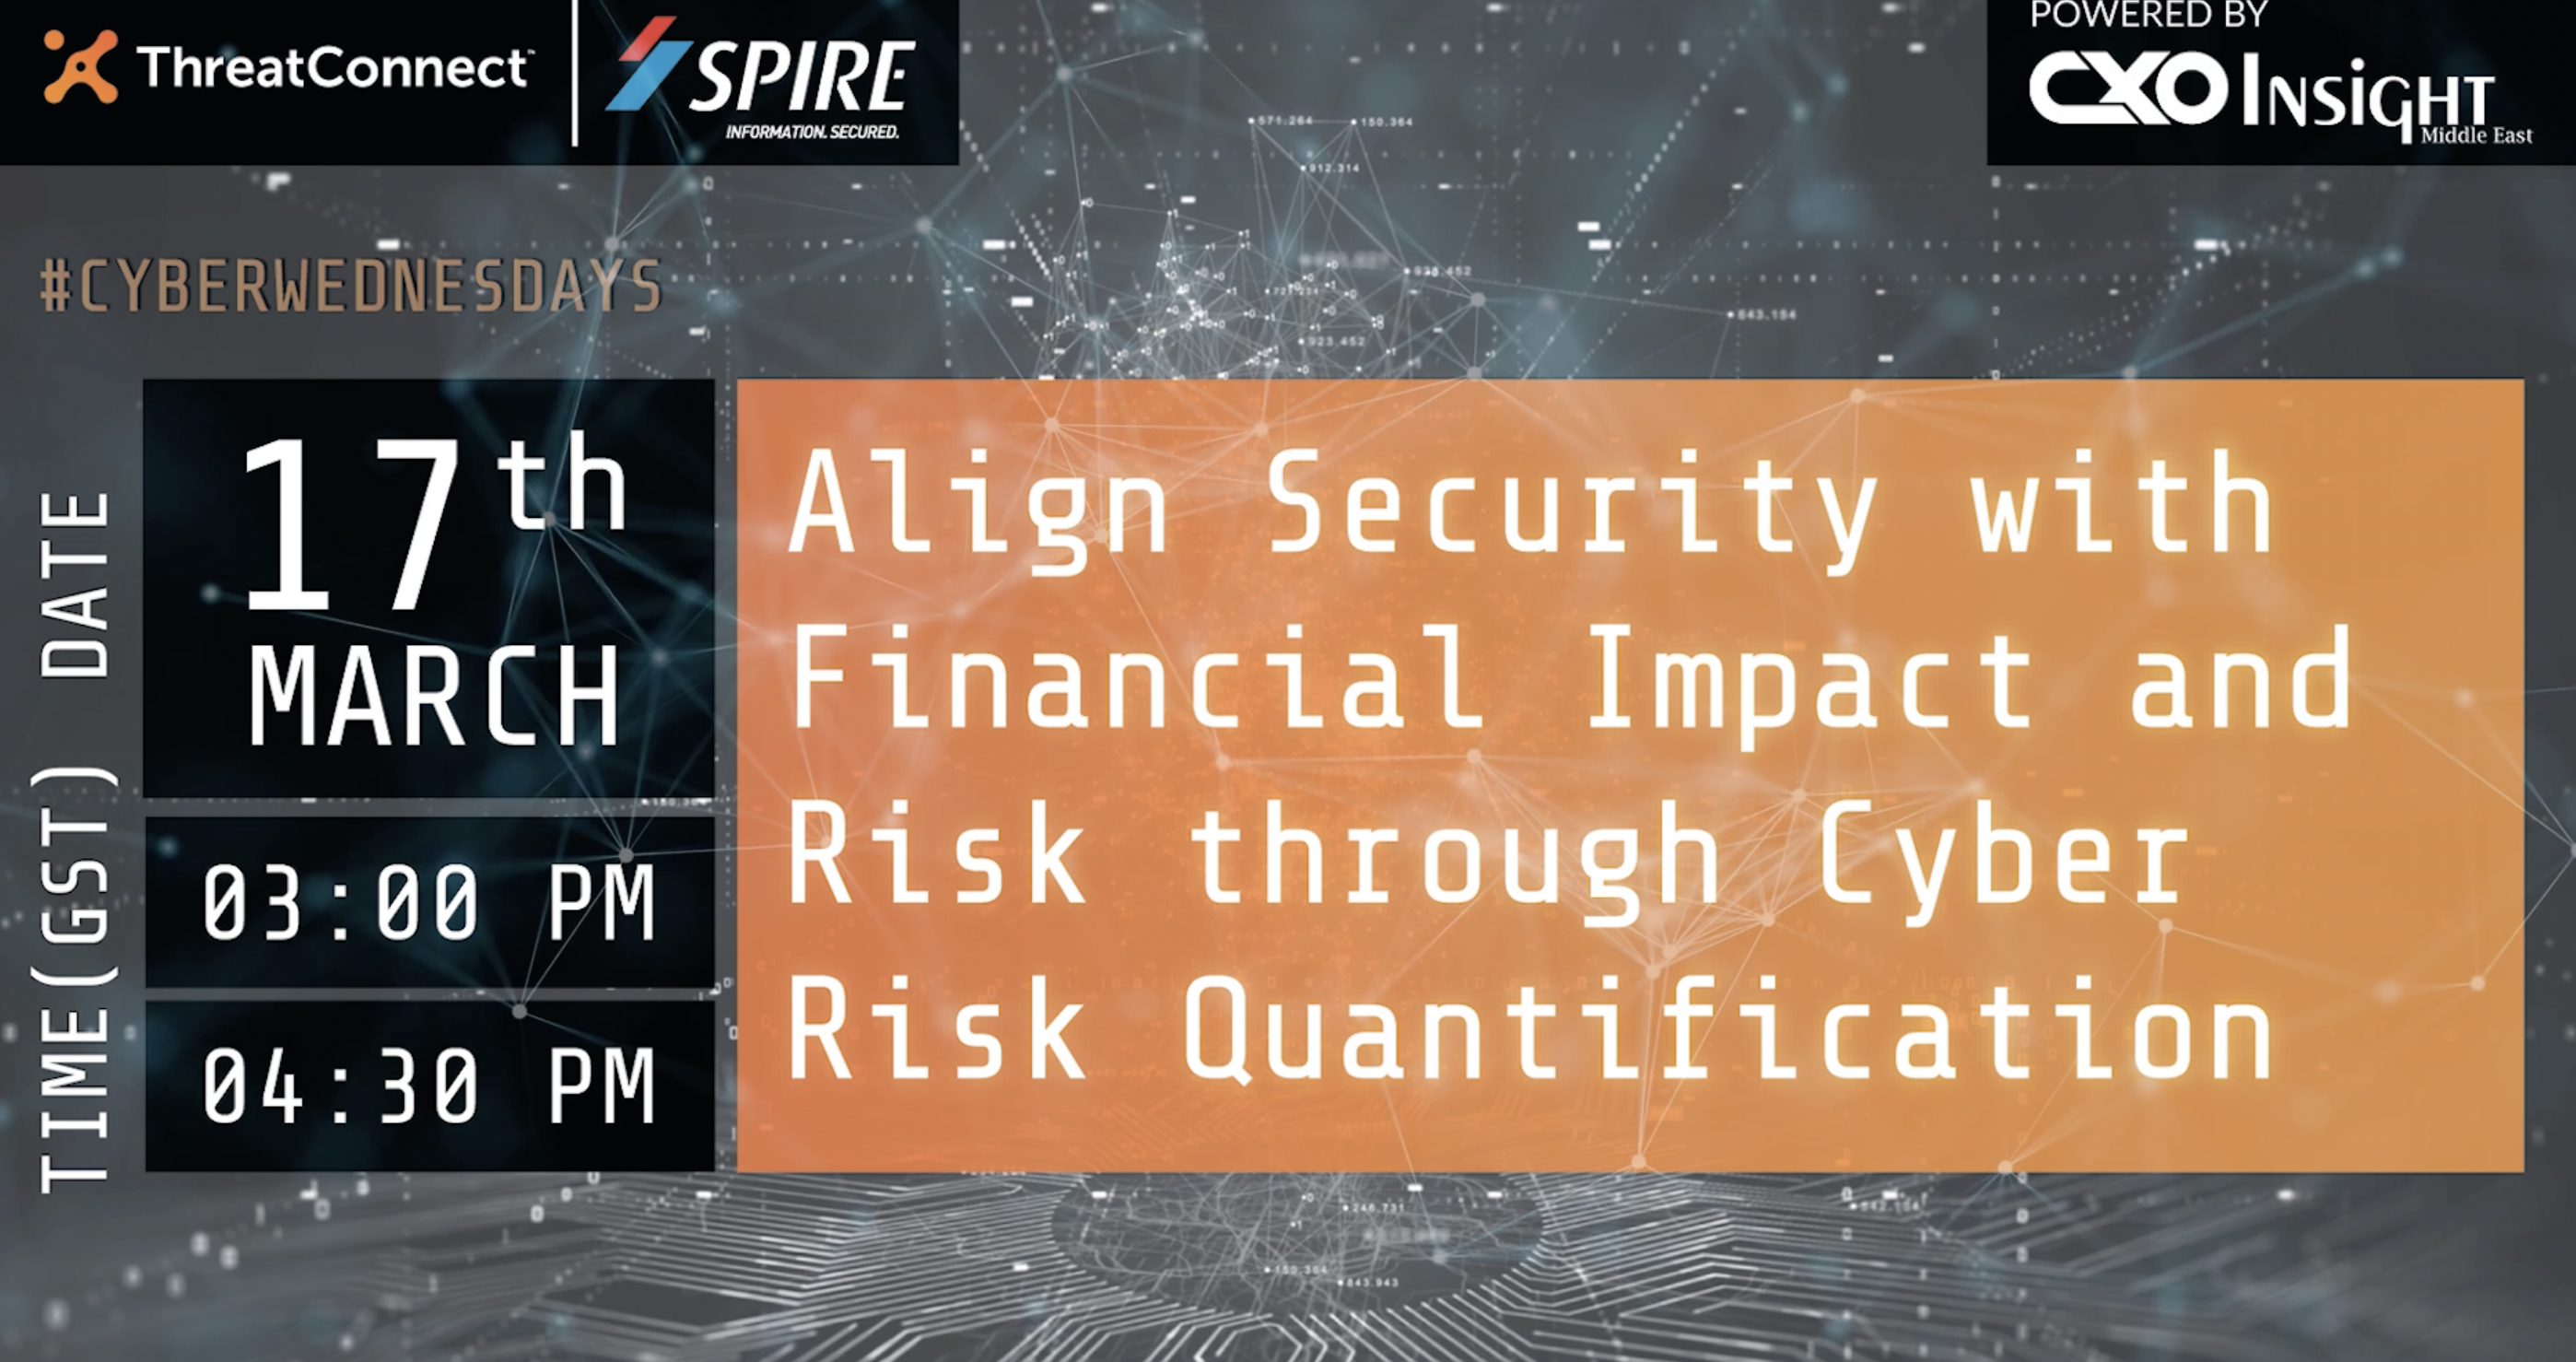 Cyber Risk Quantification Spire Solutions ThreatConnect